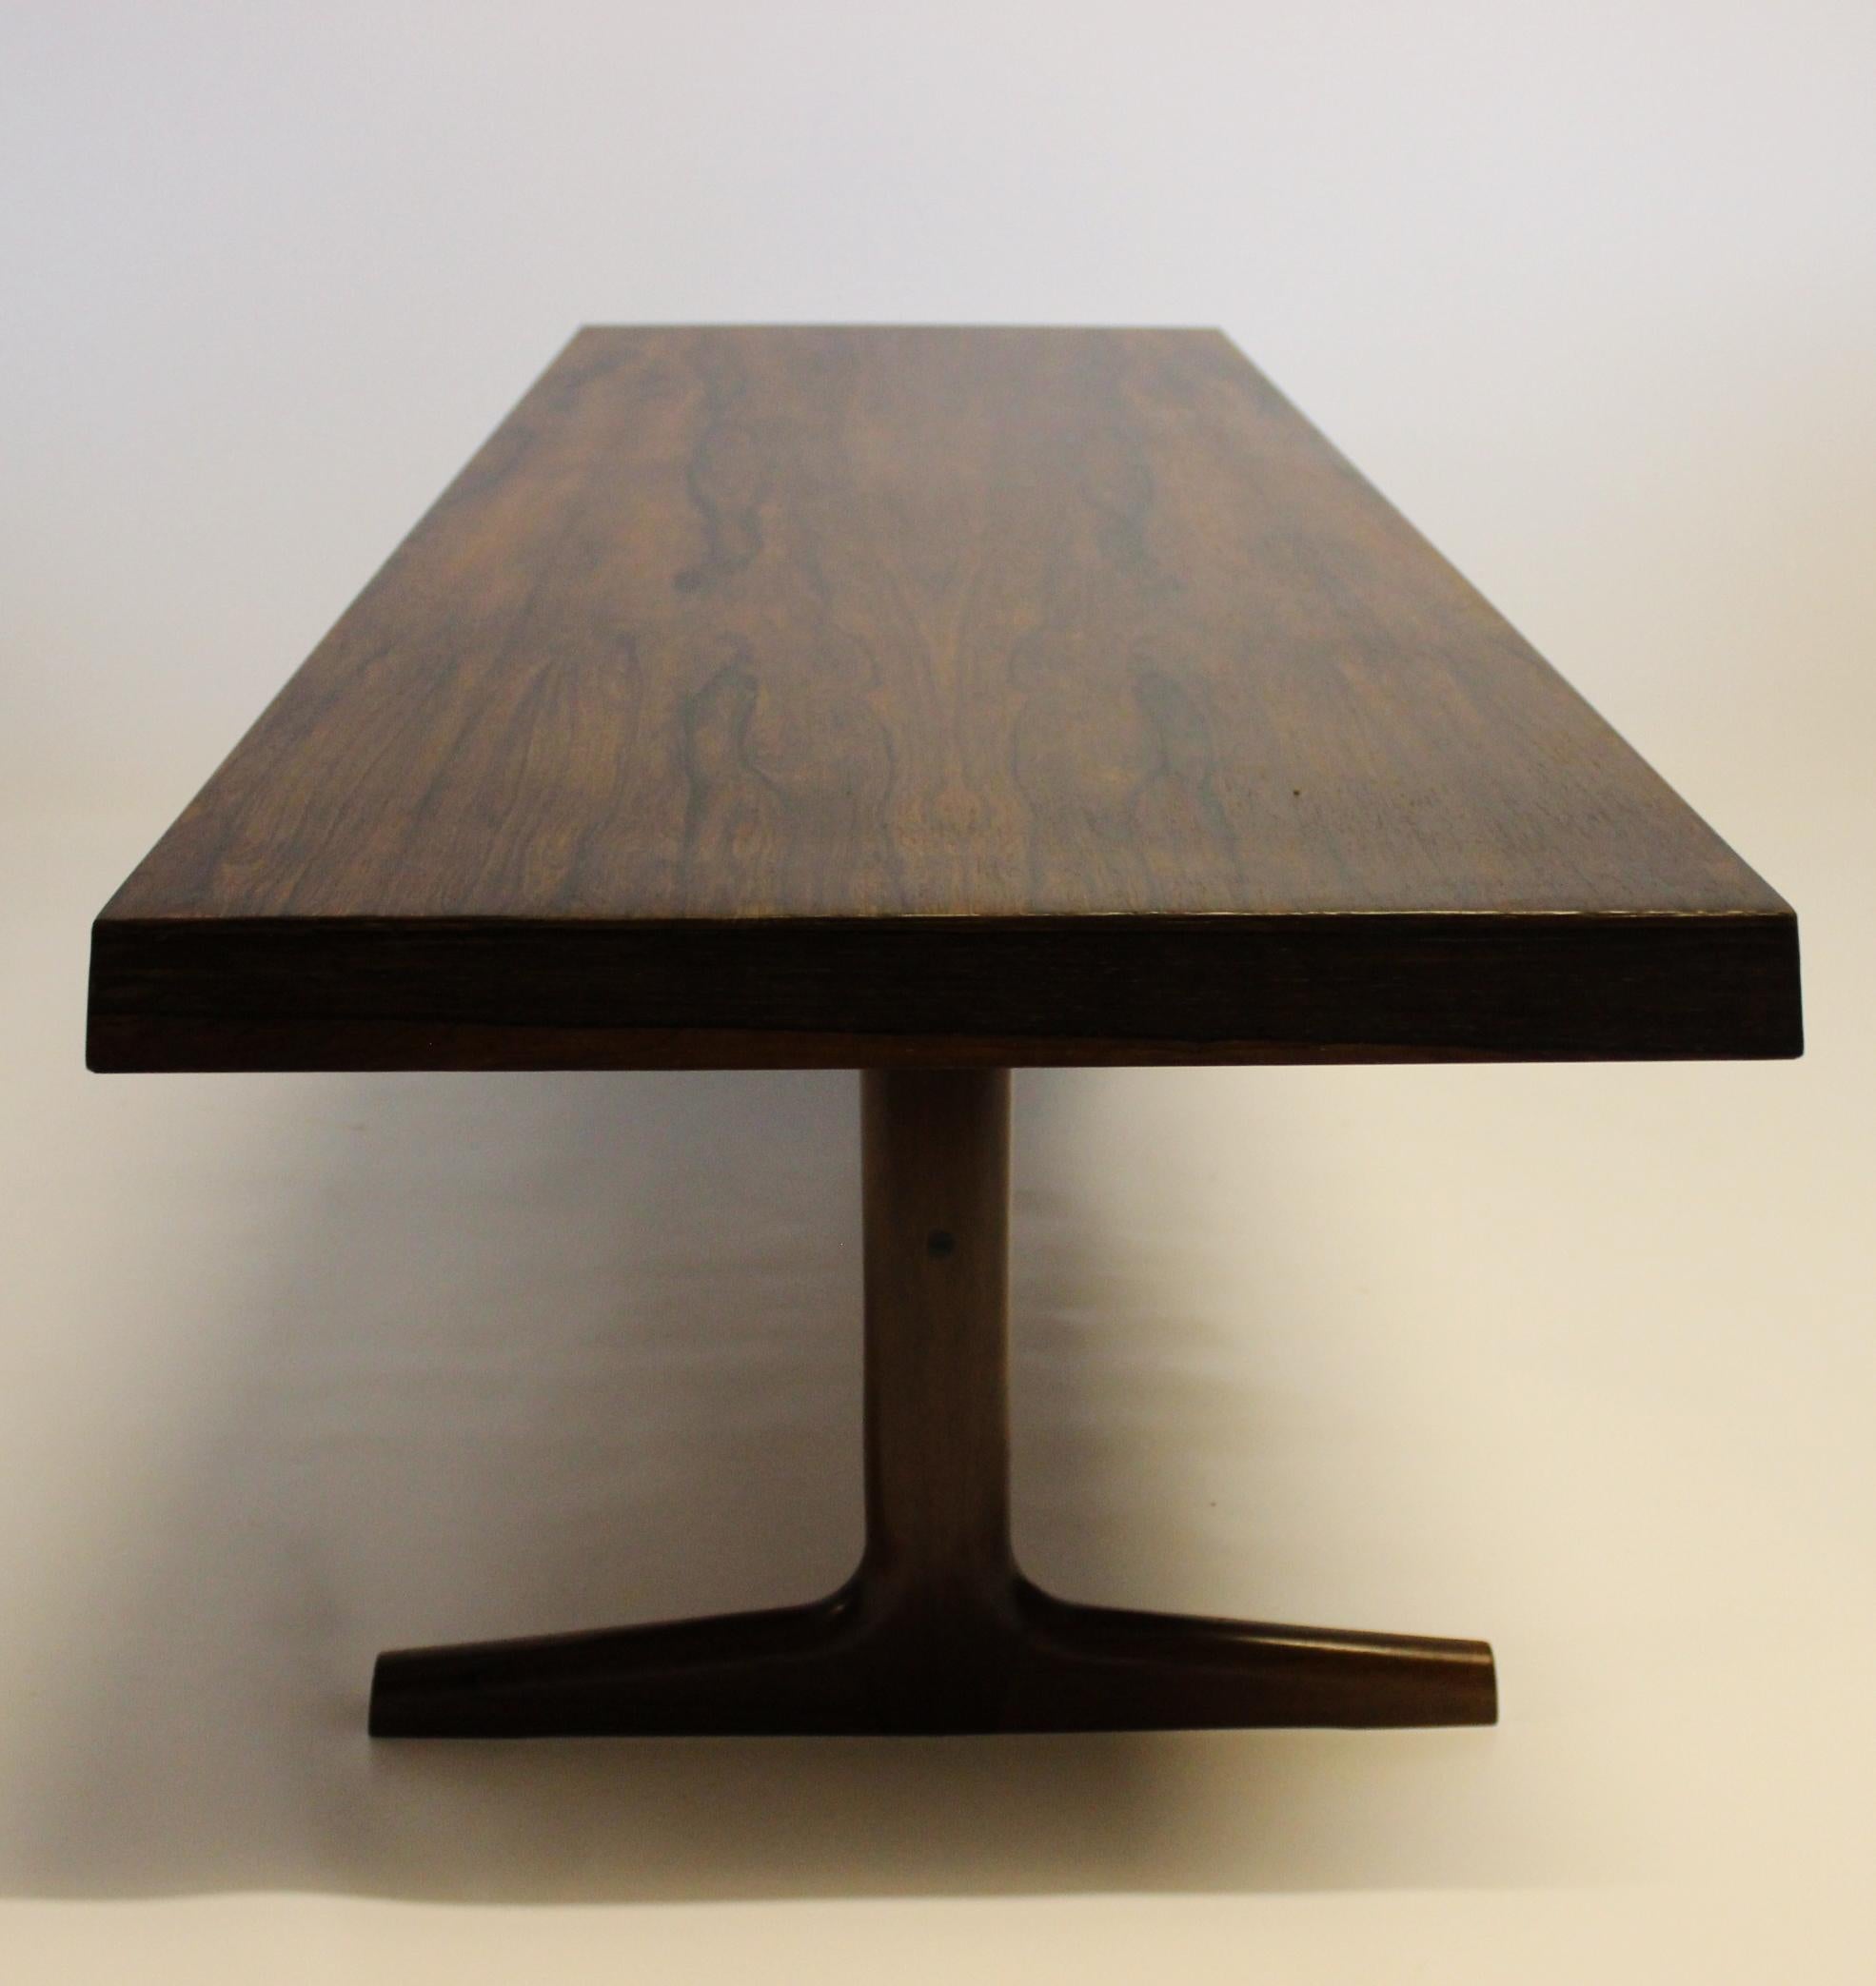 Mid-Century Modern Coffee Table Made In Rosewood, Danish Design From 1960s